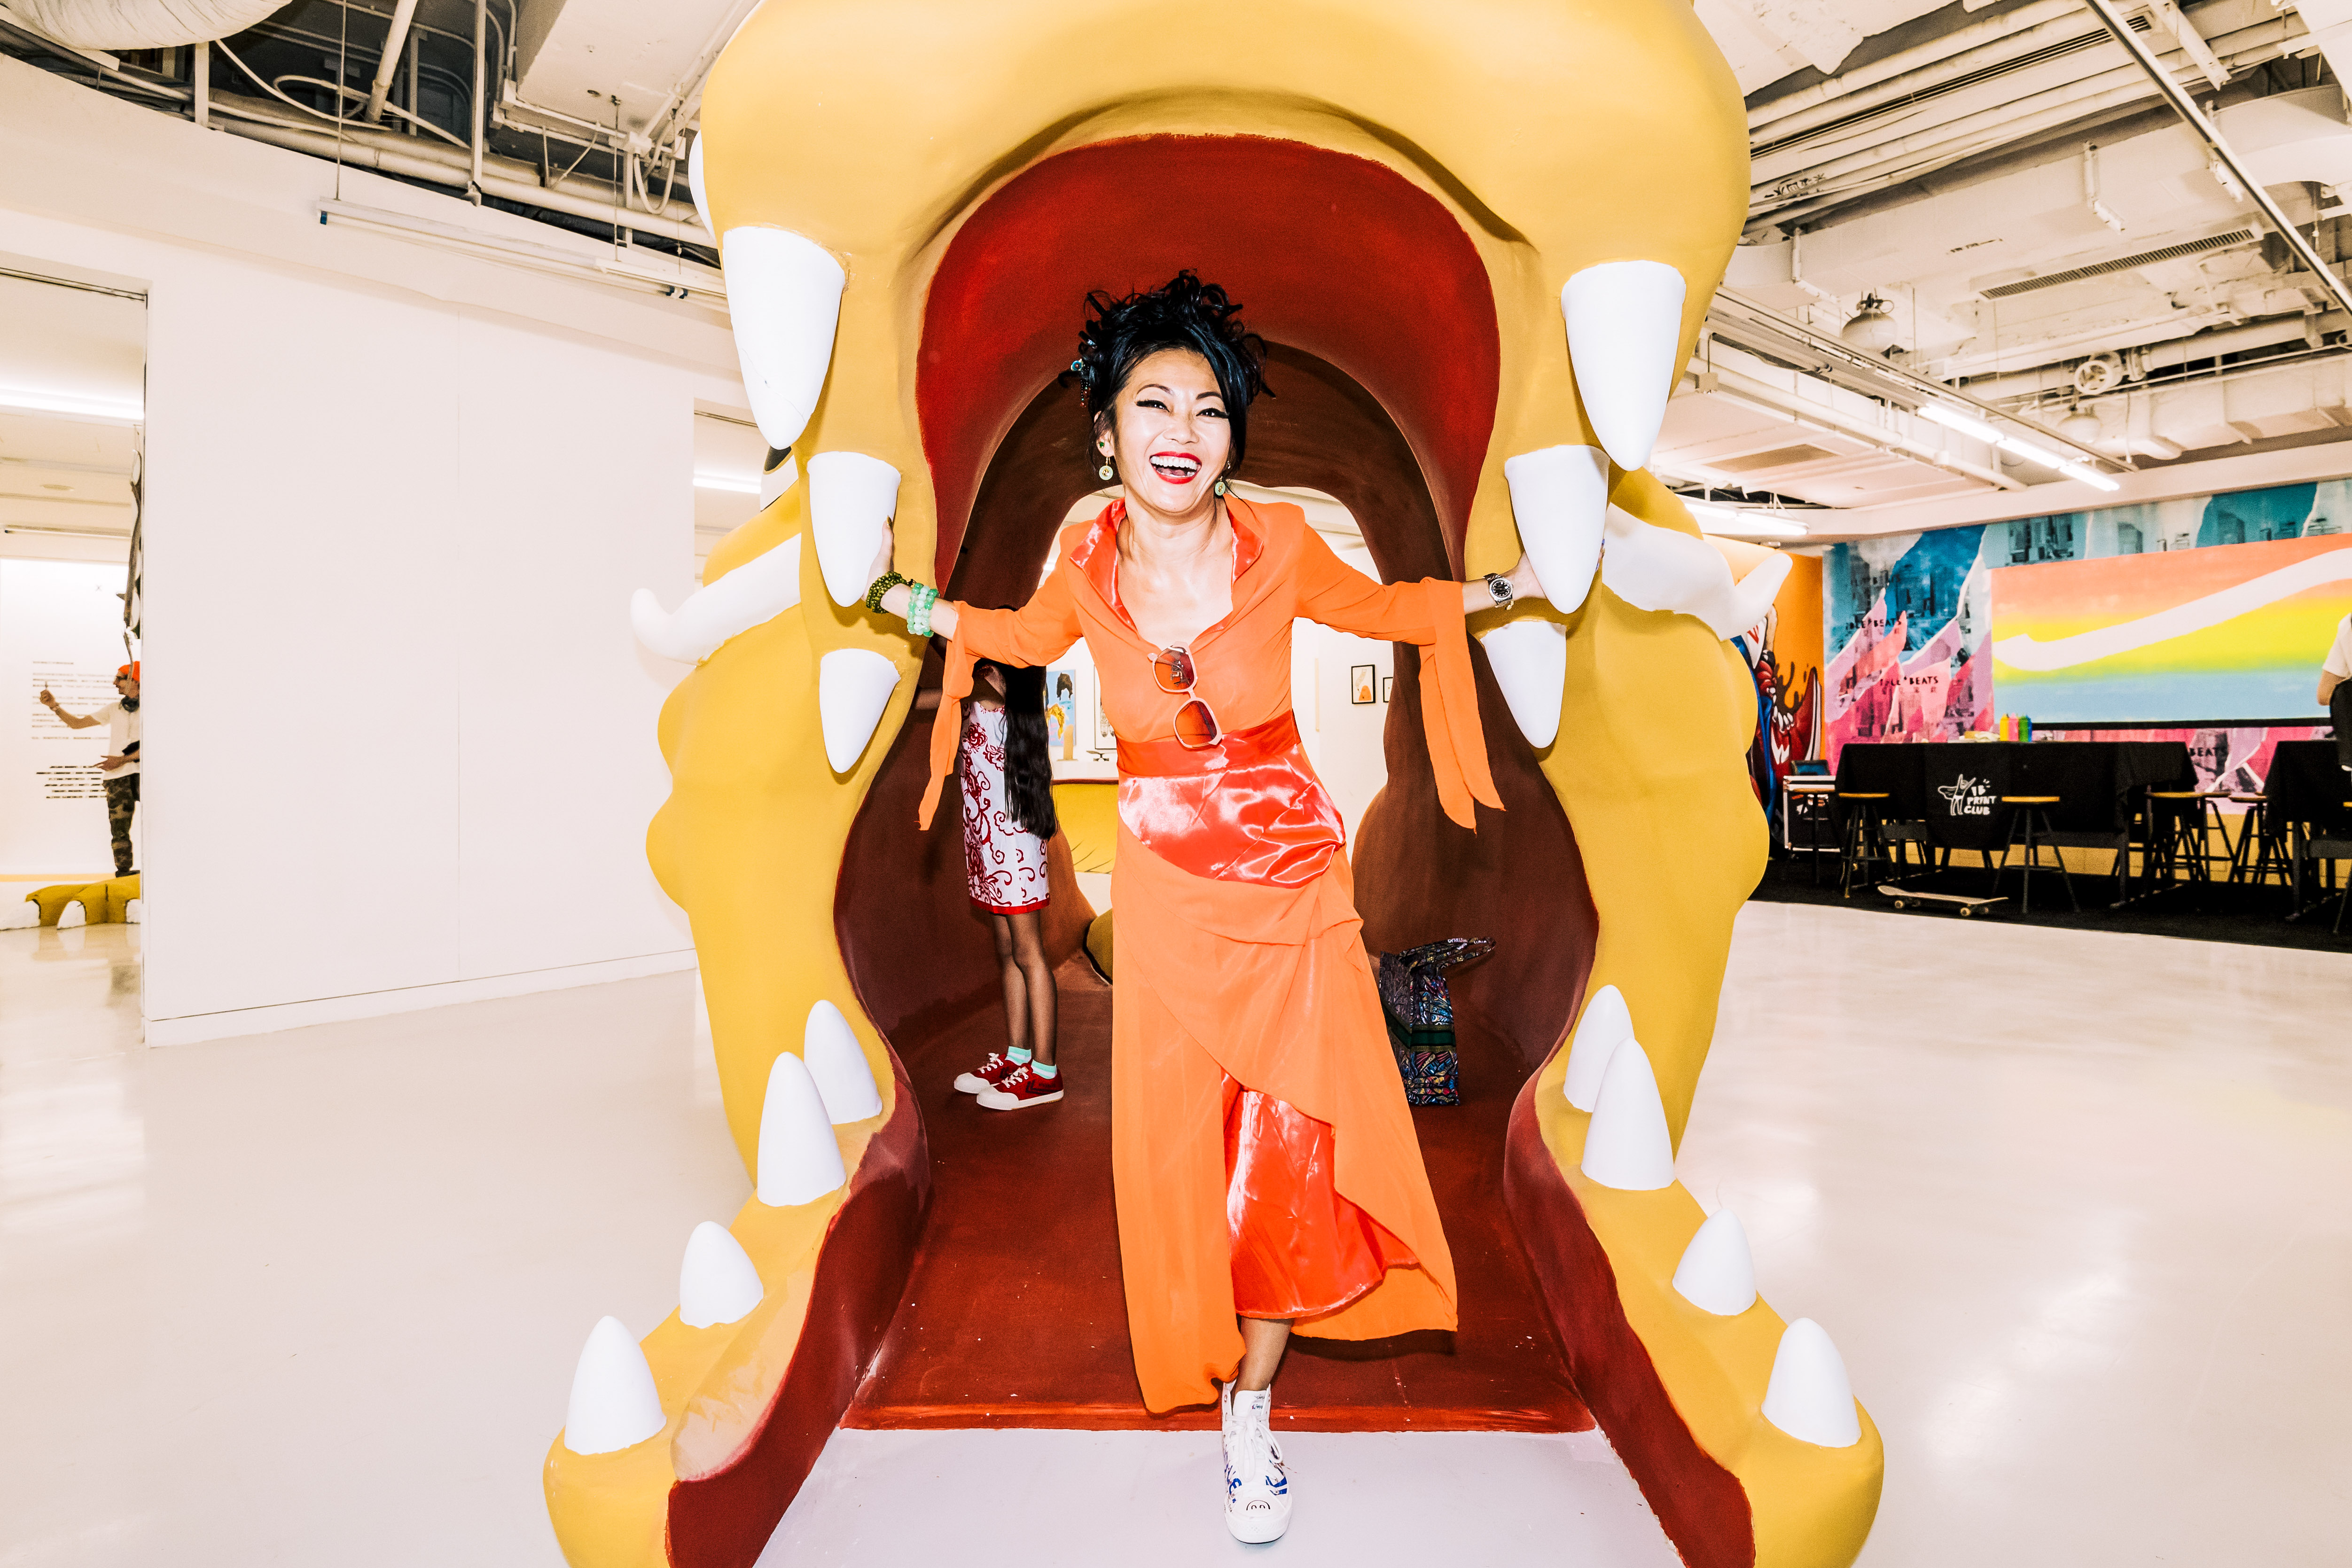 Vans taps Tmall Experience Center for exhibition_07192019